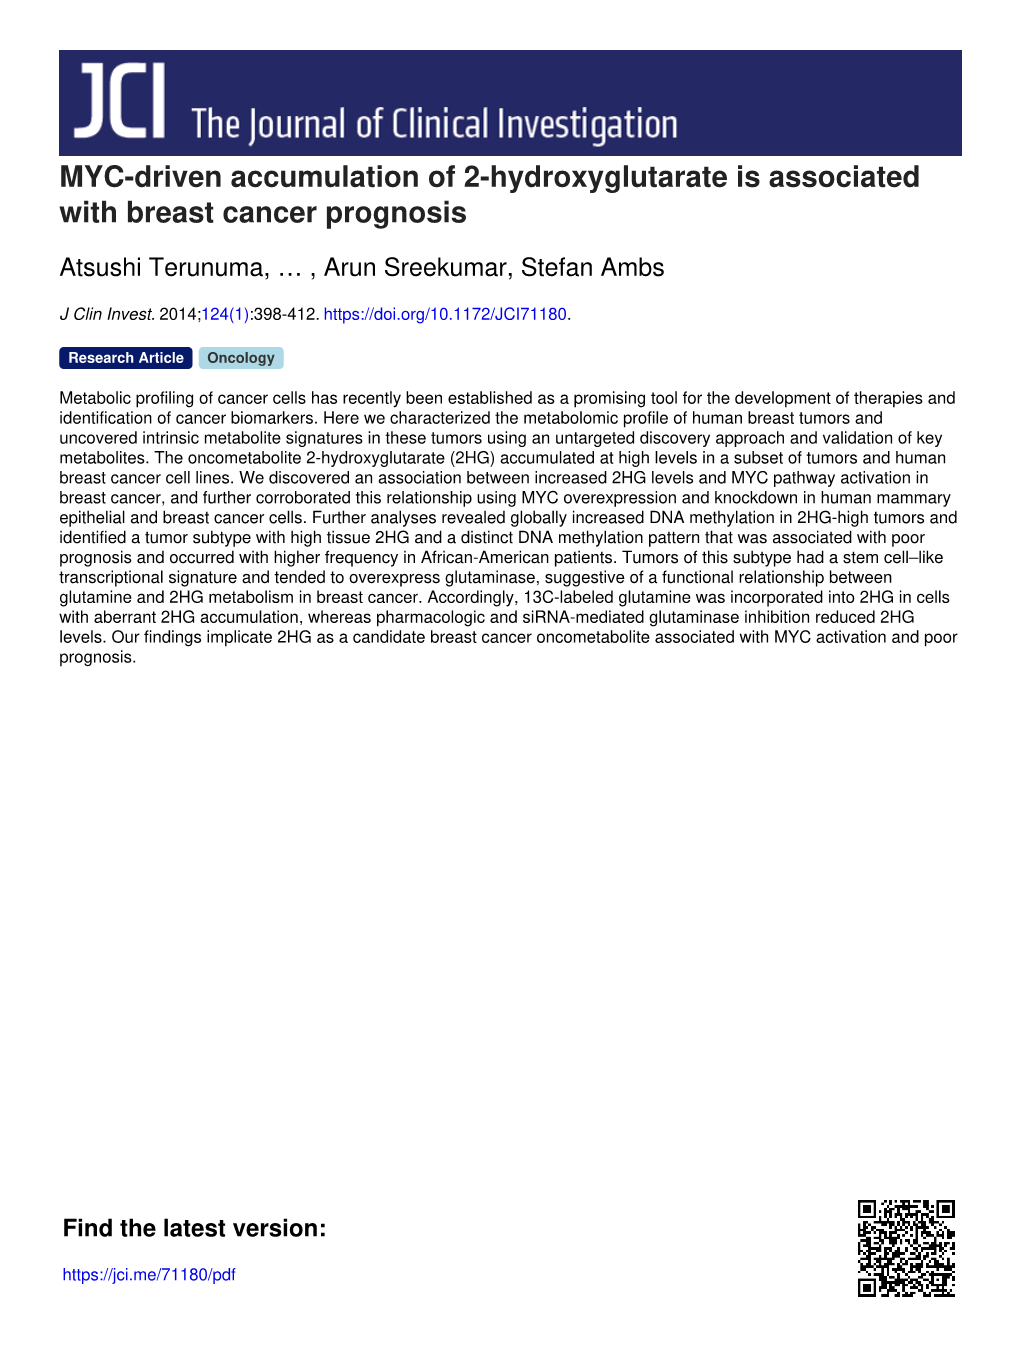 MYC-Driven Accumulation of 2-Hydroxyglutarate Is Associated with Breast Cancer Prognosis